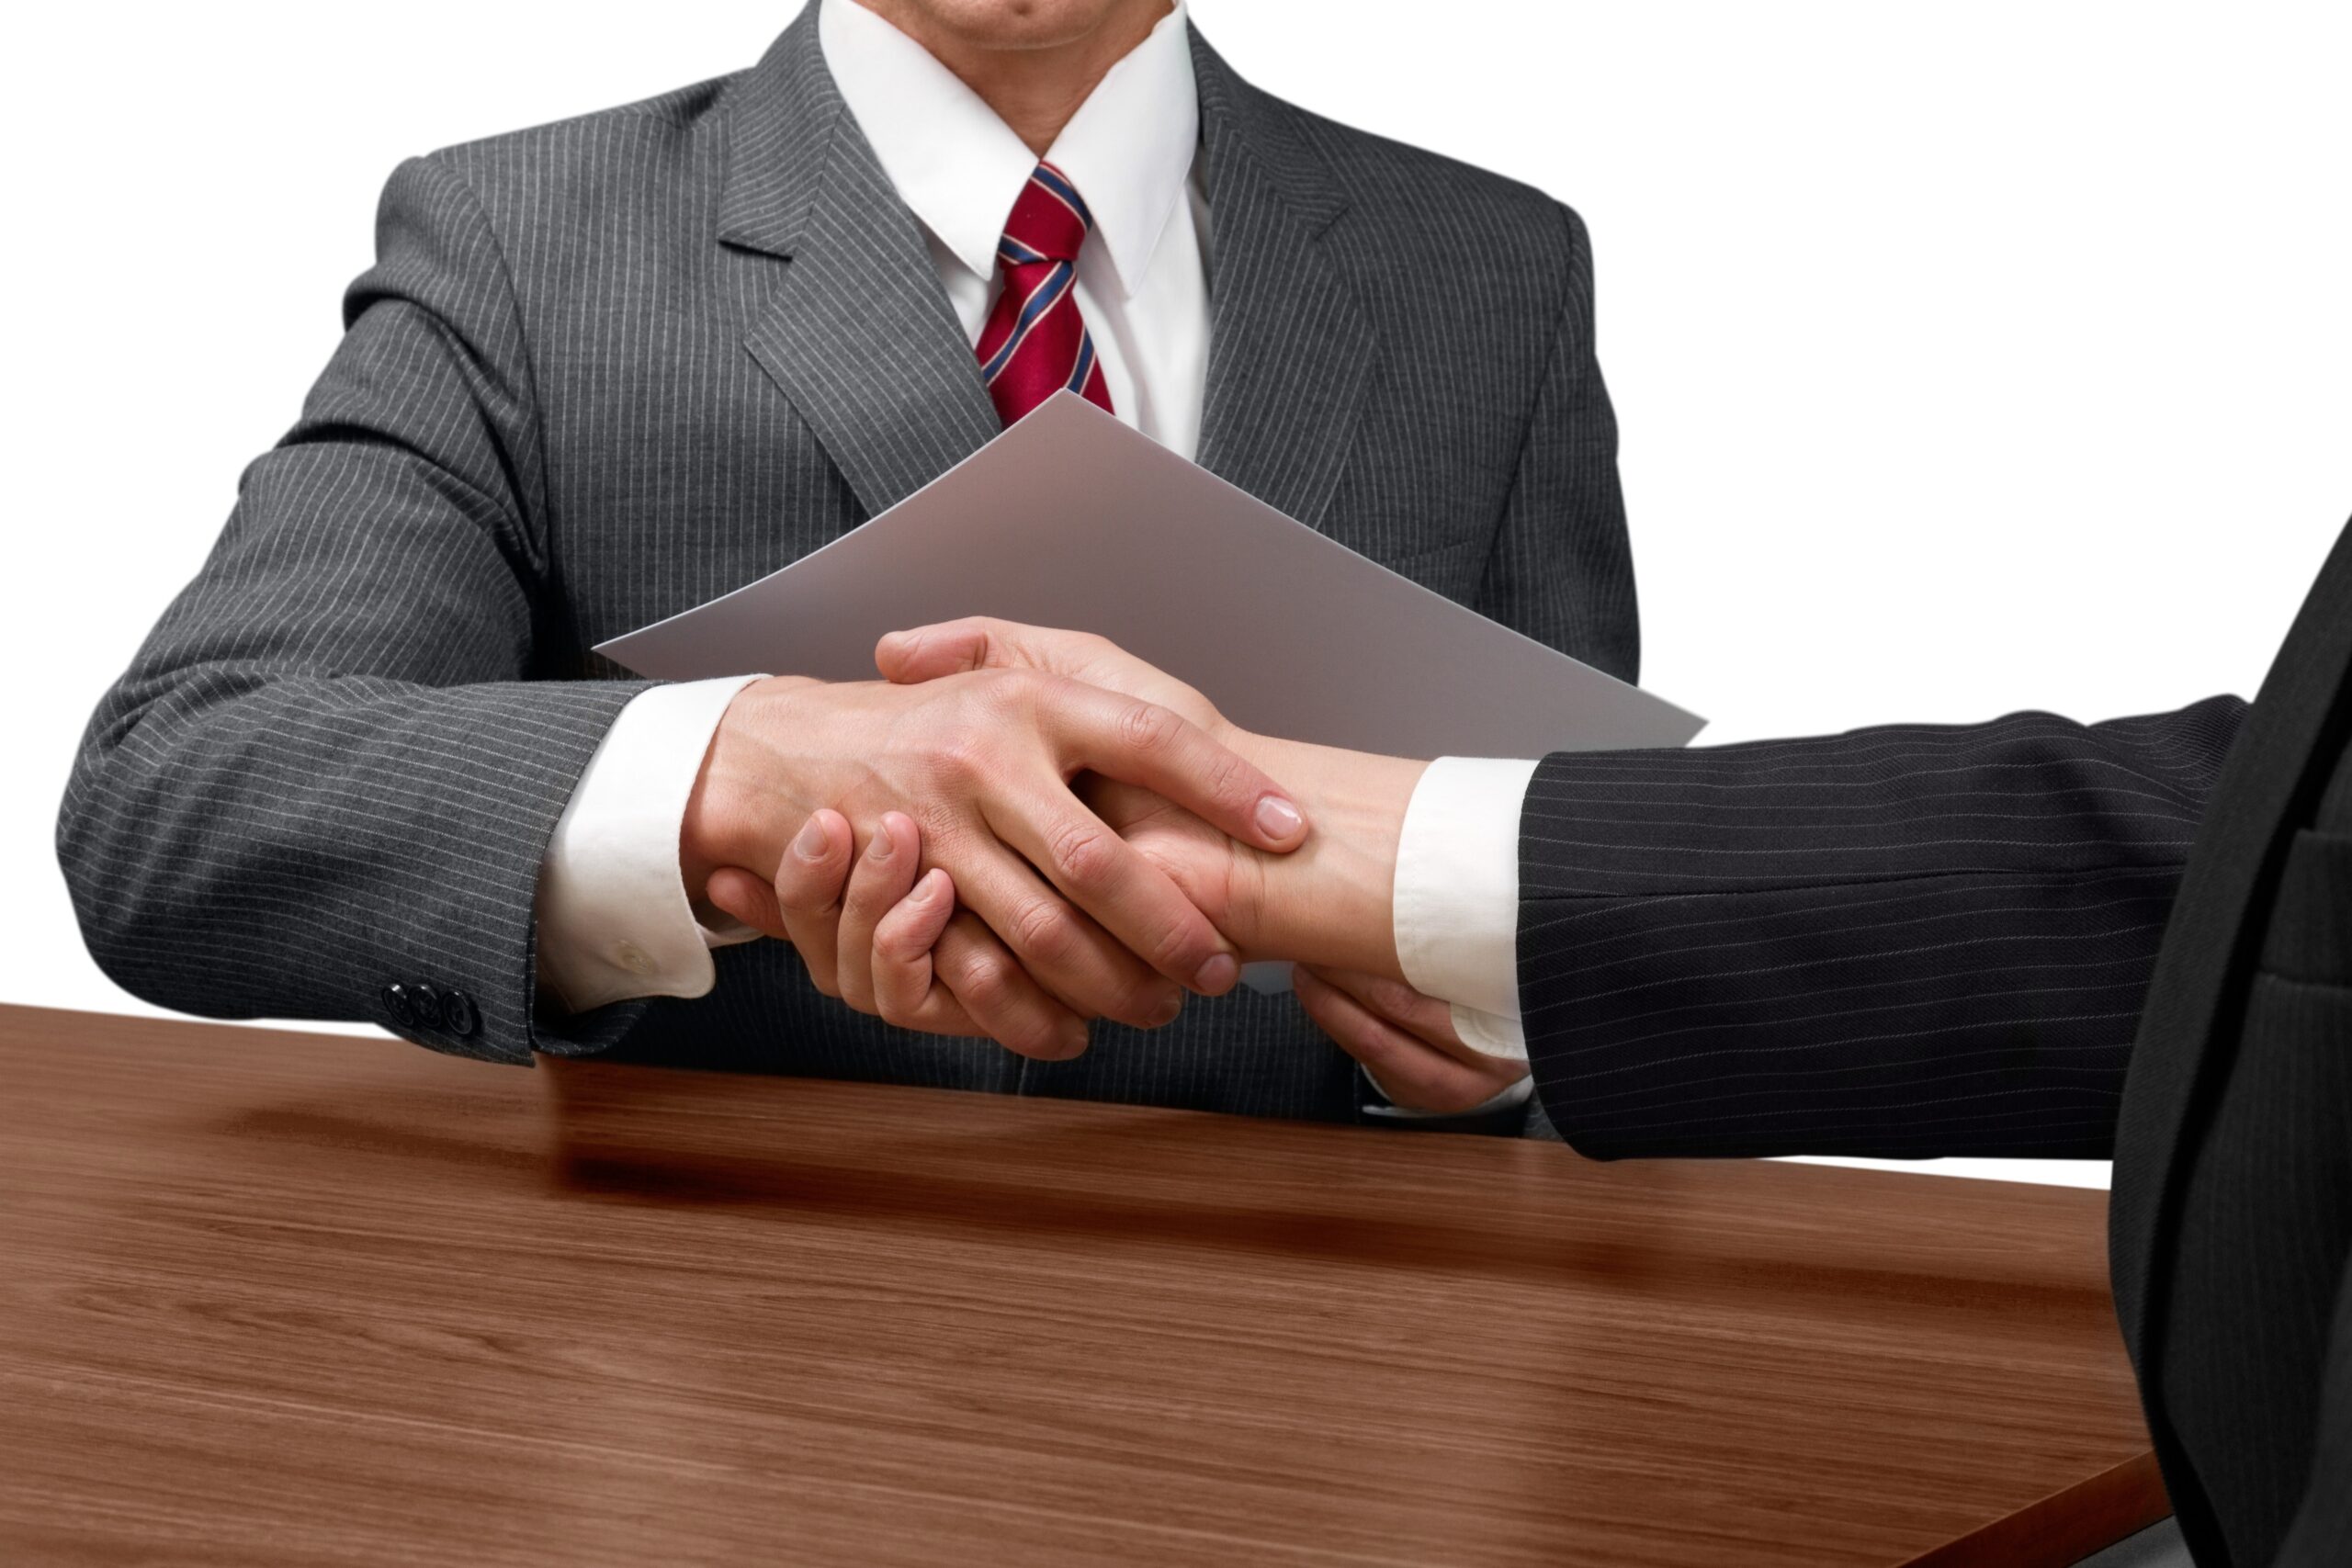 Understanding the “Why?” and “What?” of Written Partnership Agreements